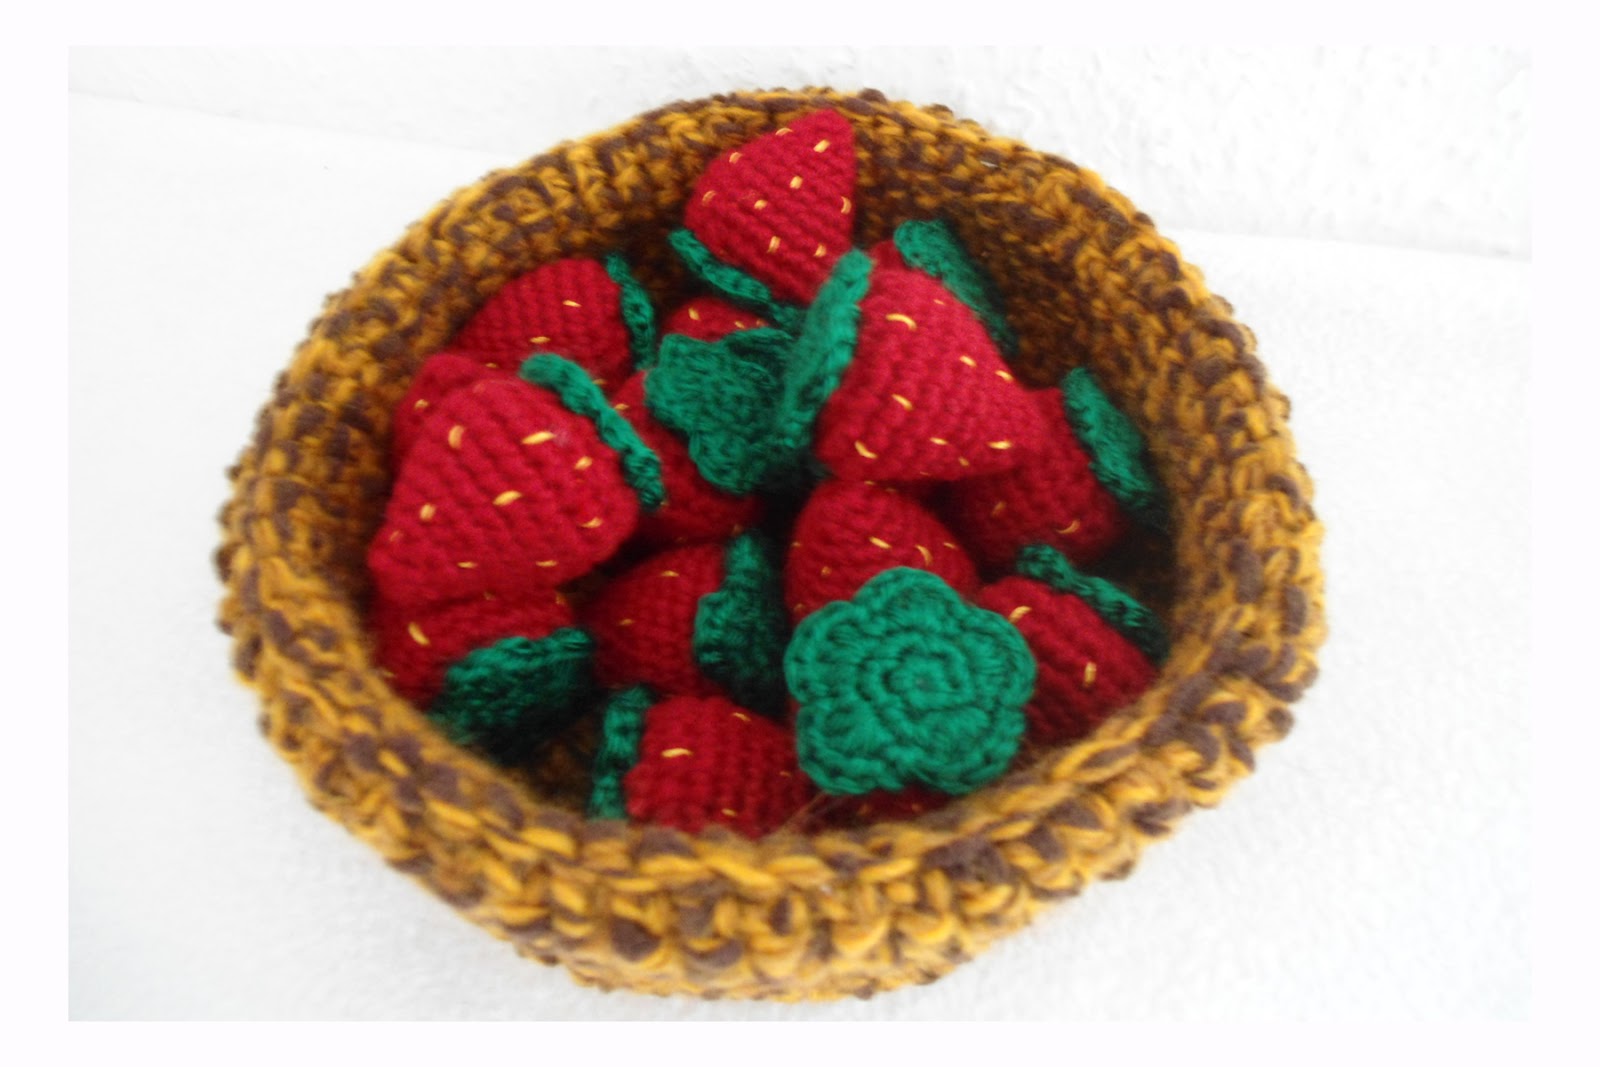 Crochet Strawberry Pattern: Free and Easy to Follow - Craft and Crochet